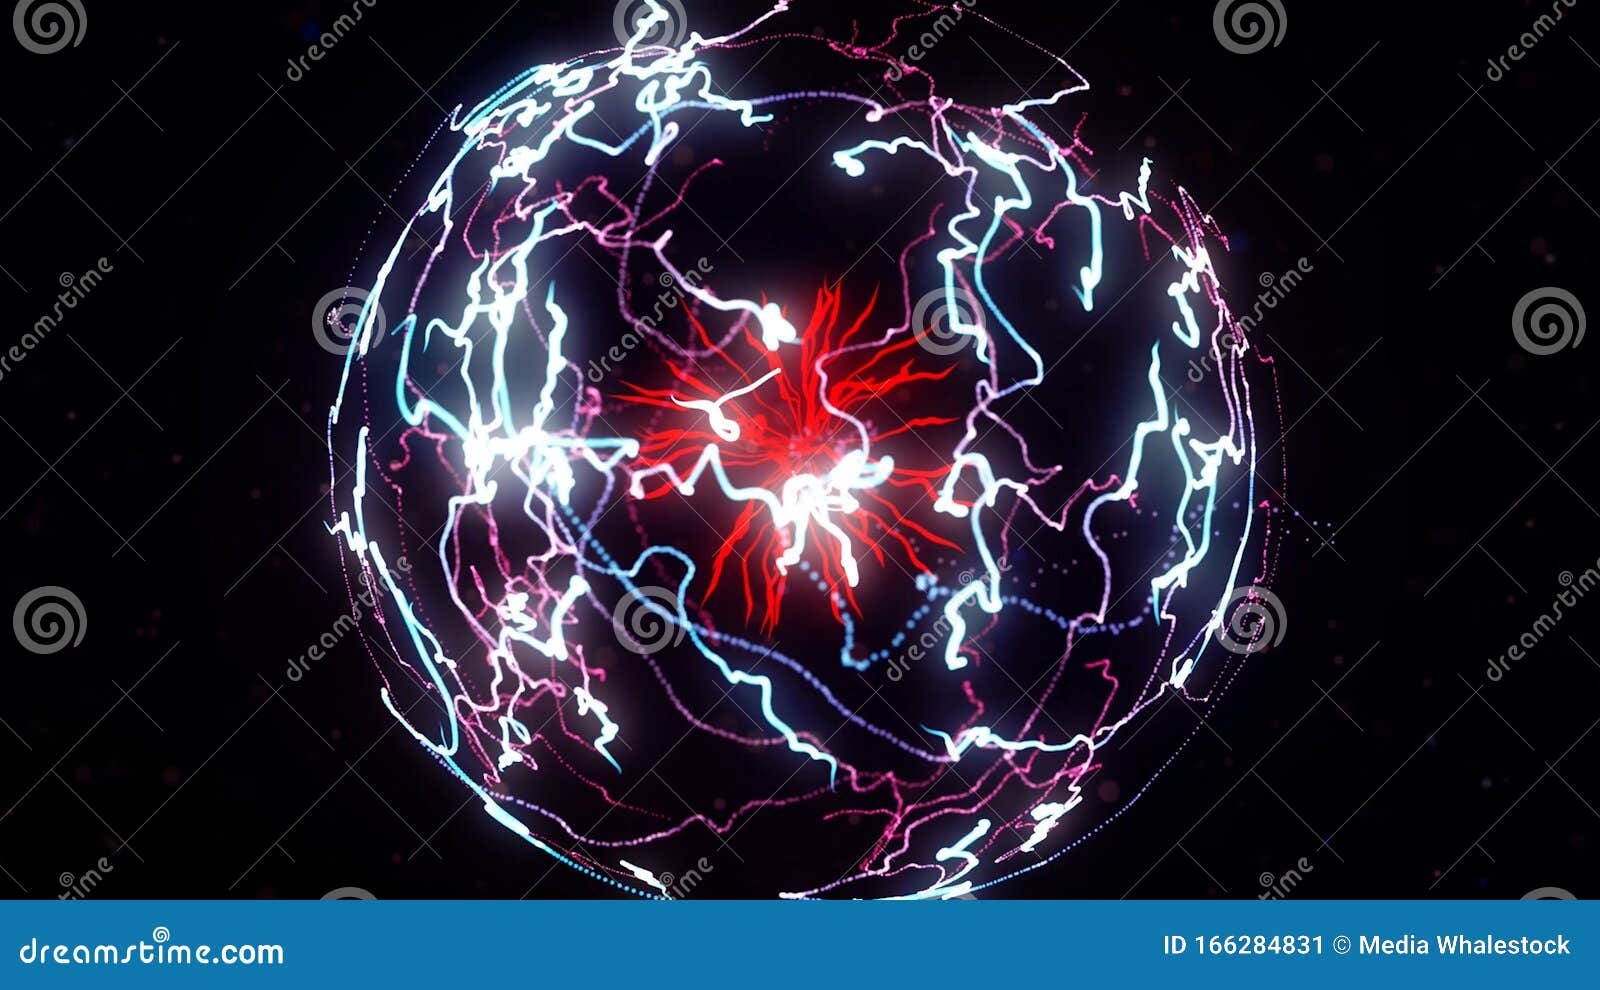 Abstract Colorful Explosion of Neon Nucleus Isolated on Black Background.  Animation. Amazing 3d Impulse Spreading into Stock Illustration -  Illustration of icon, business: 166284831